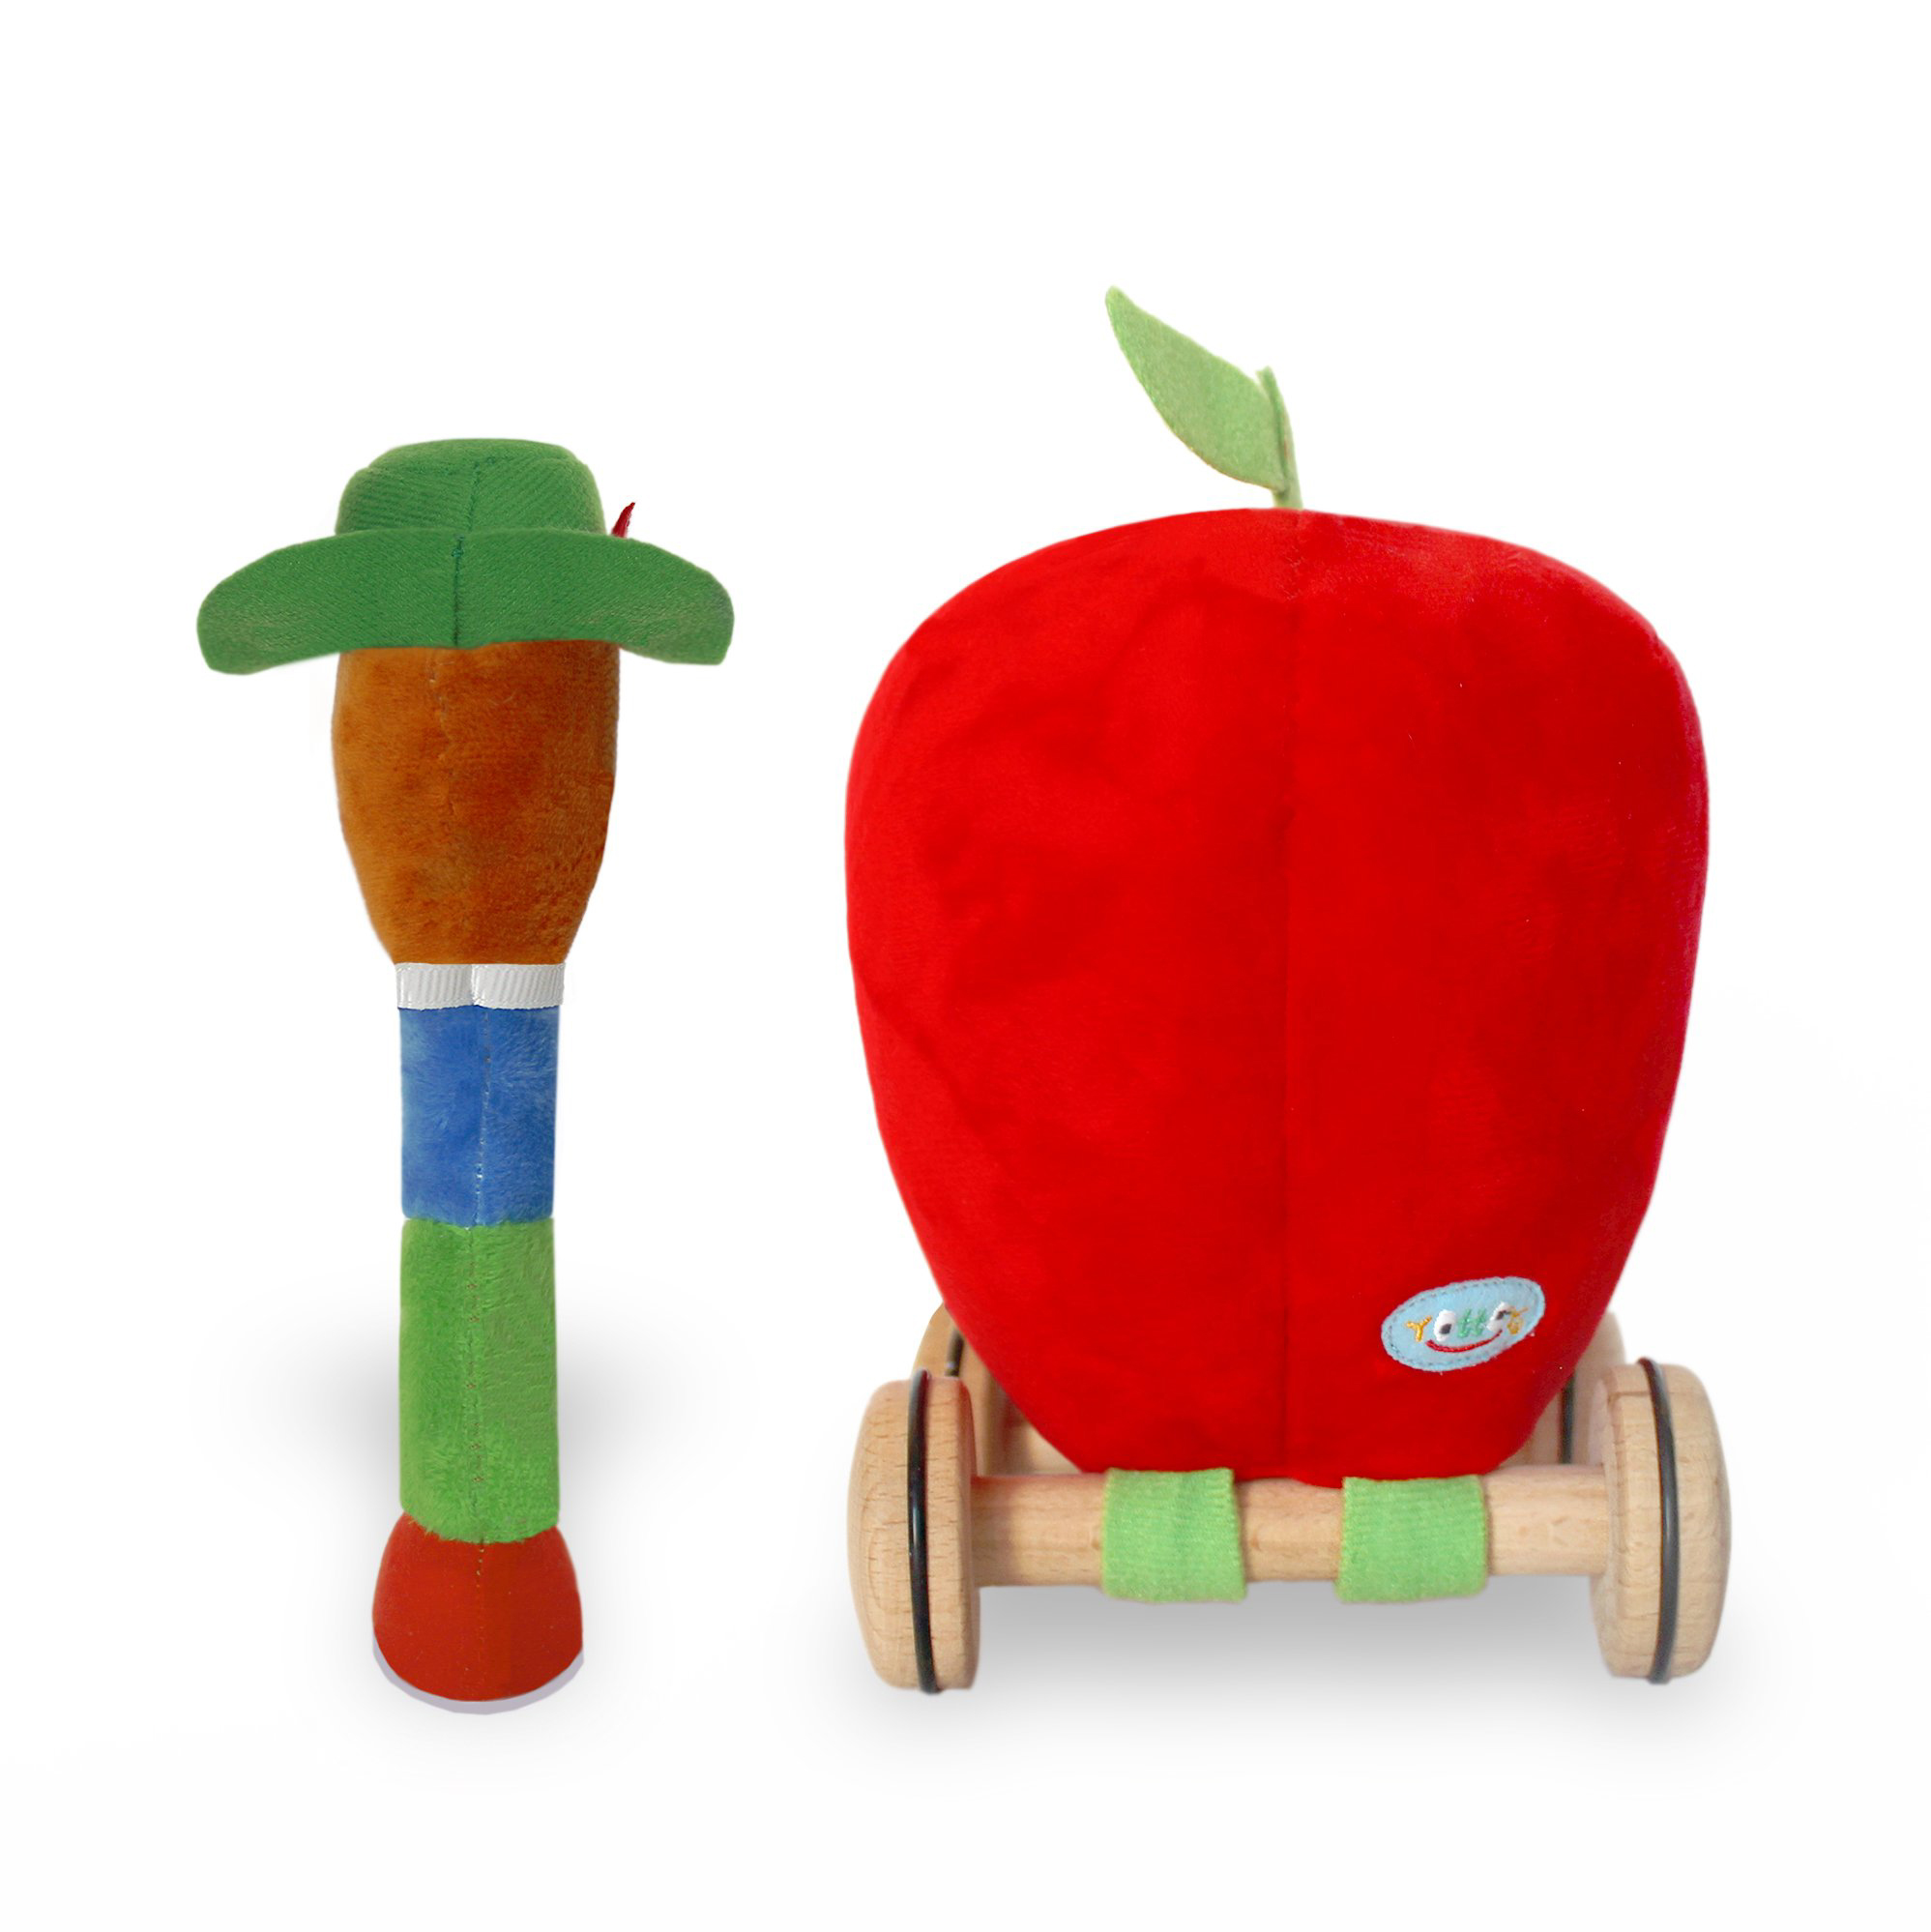 Lowly Worm soft toy and Apple car 3